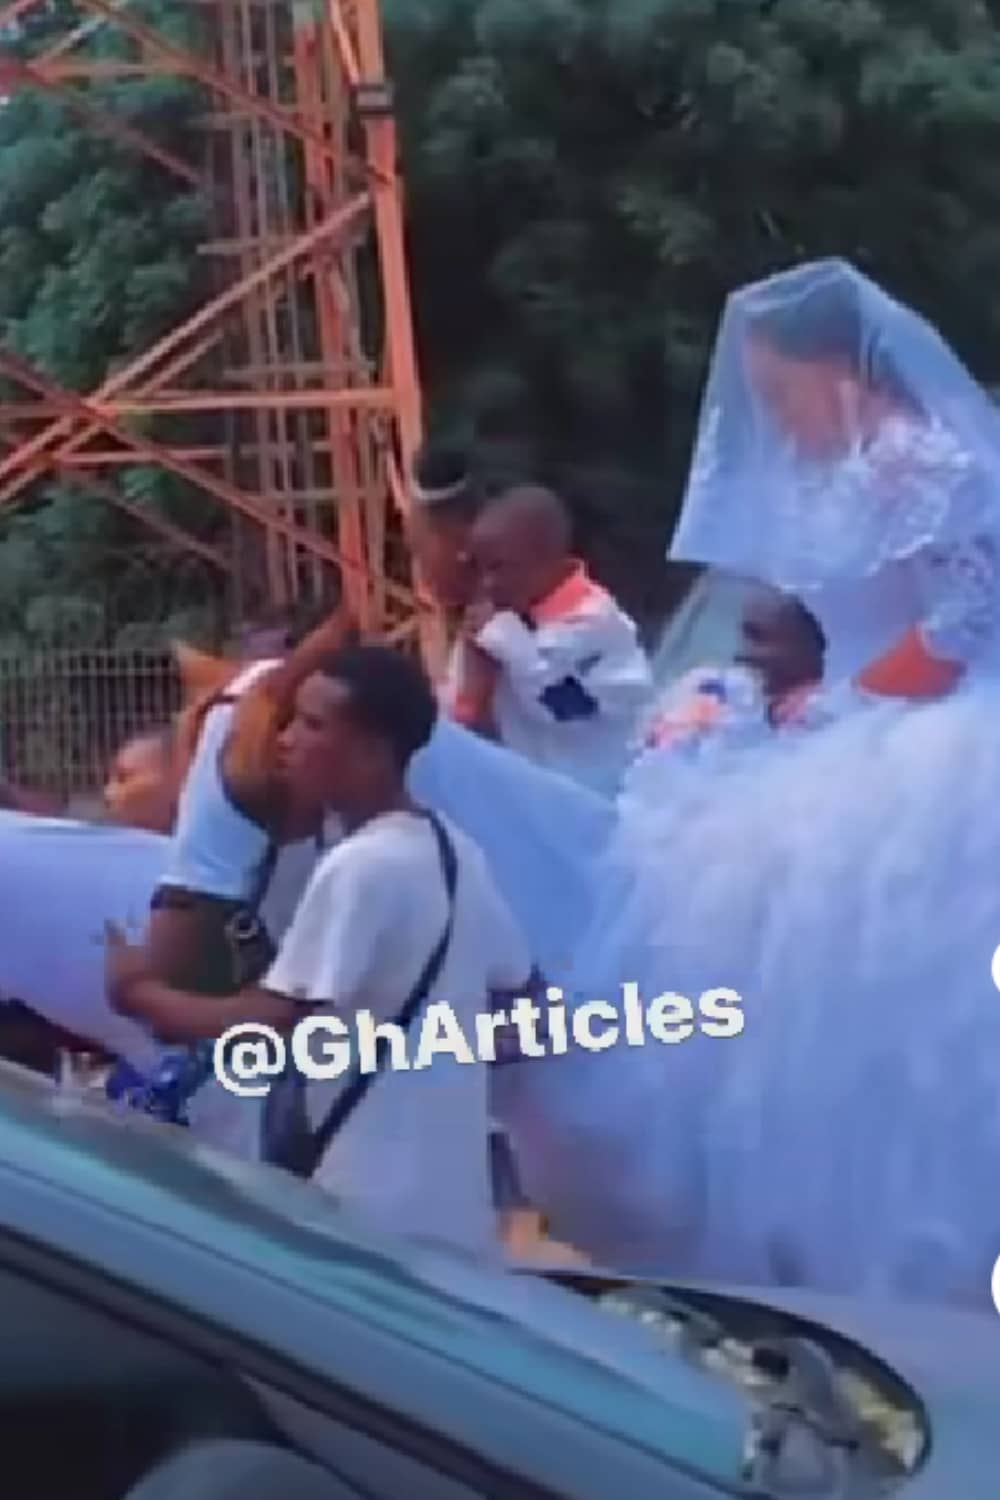 Bride goes to her white wedding with convoy of horses (Video)